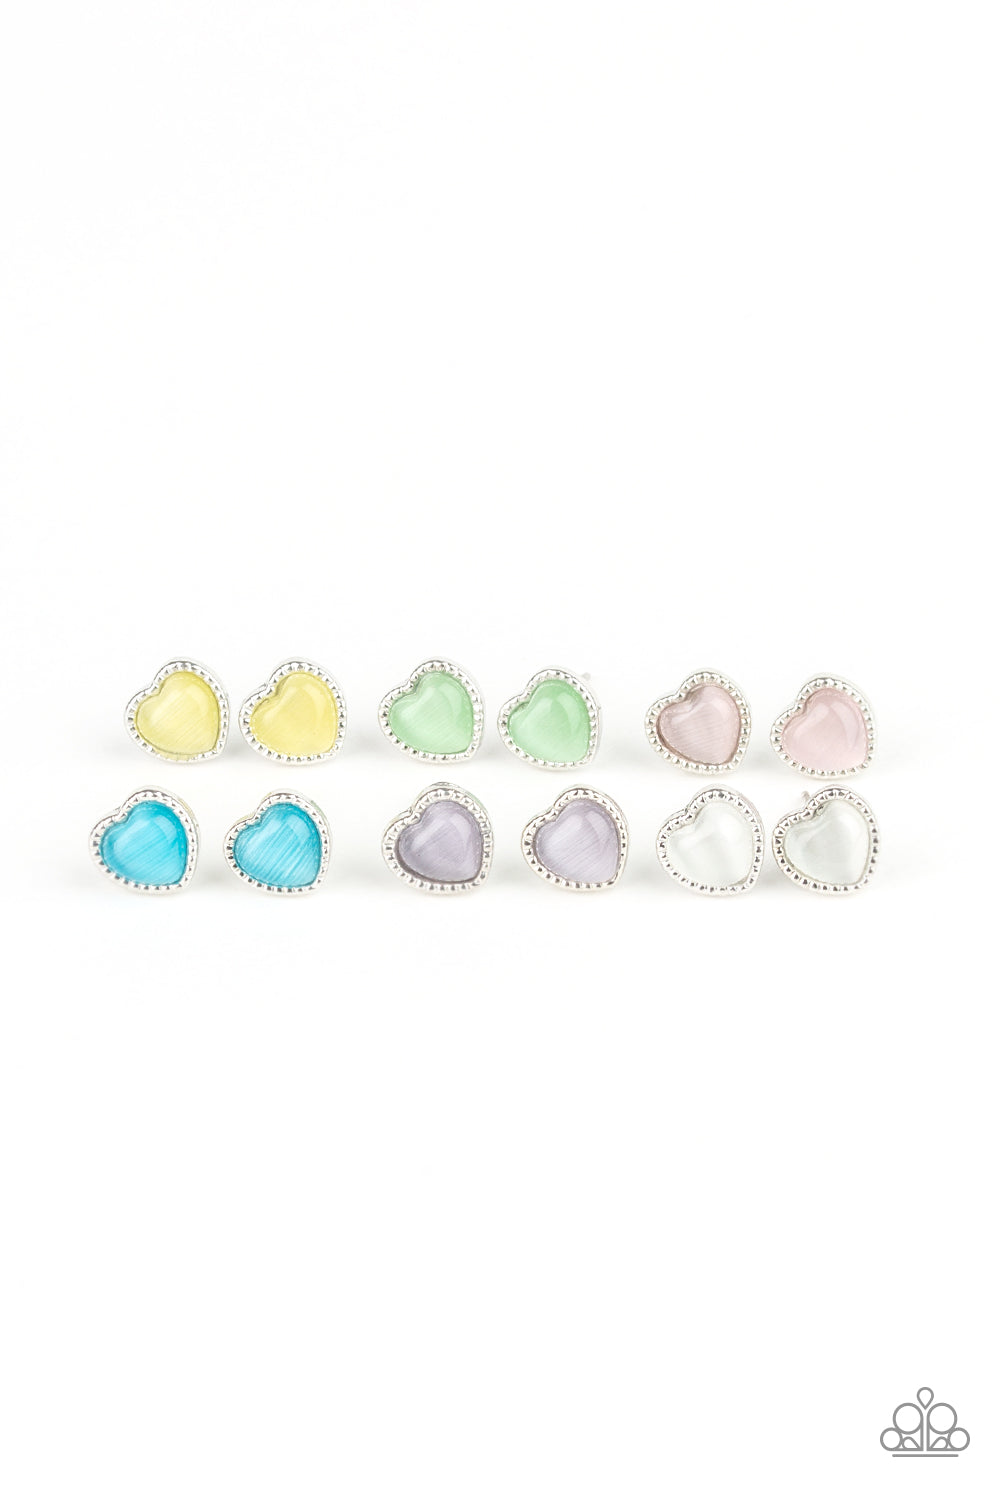 Moonstone Heart Starlet Shimmer Earrings Paparazzi Accessories